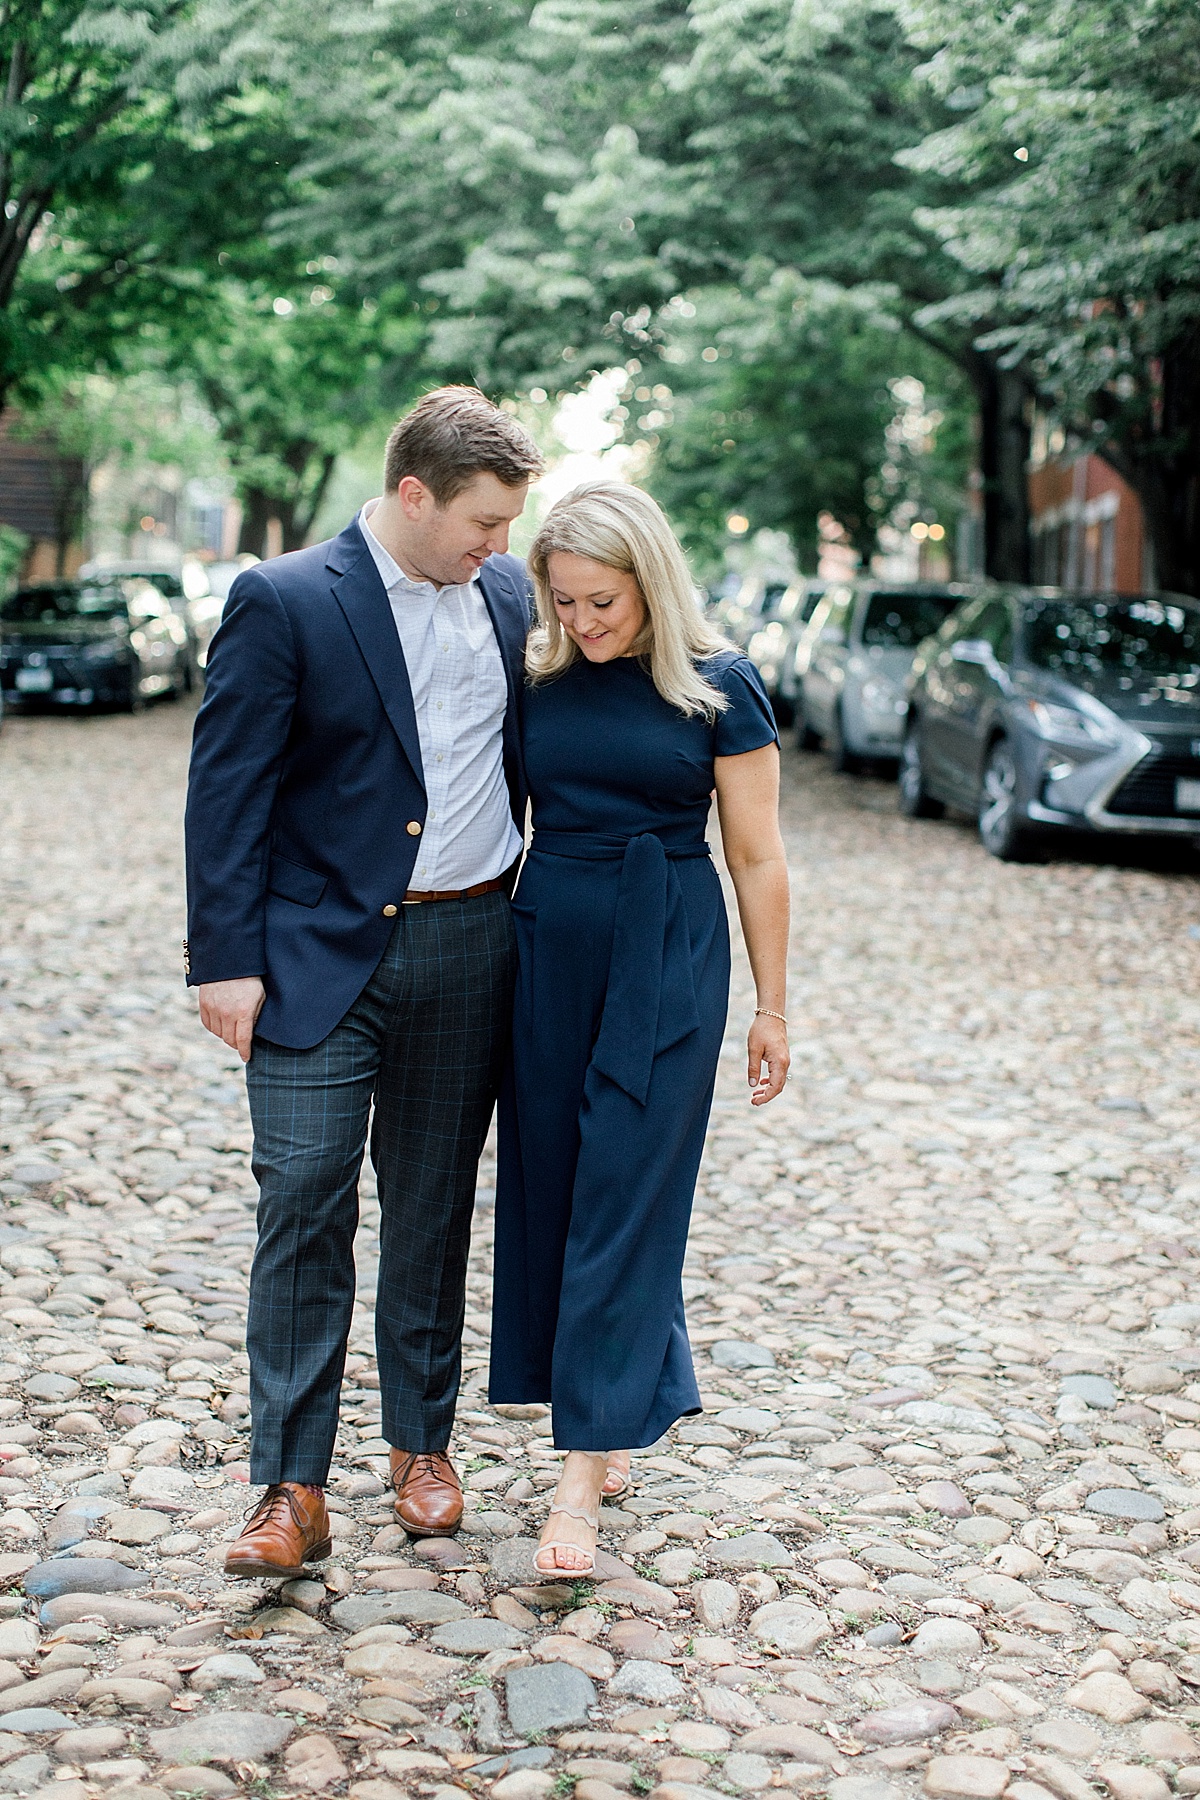 Preppy Alexandria, Virginia engagement session | Abby Grace Photography